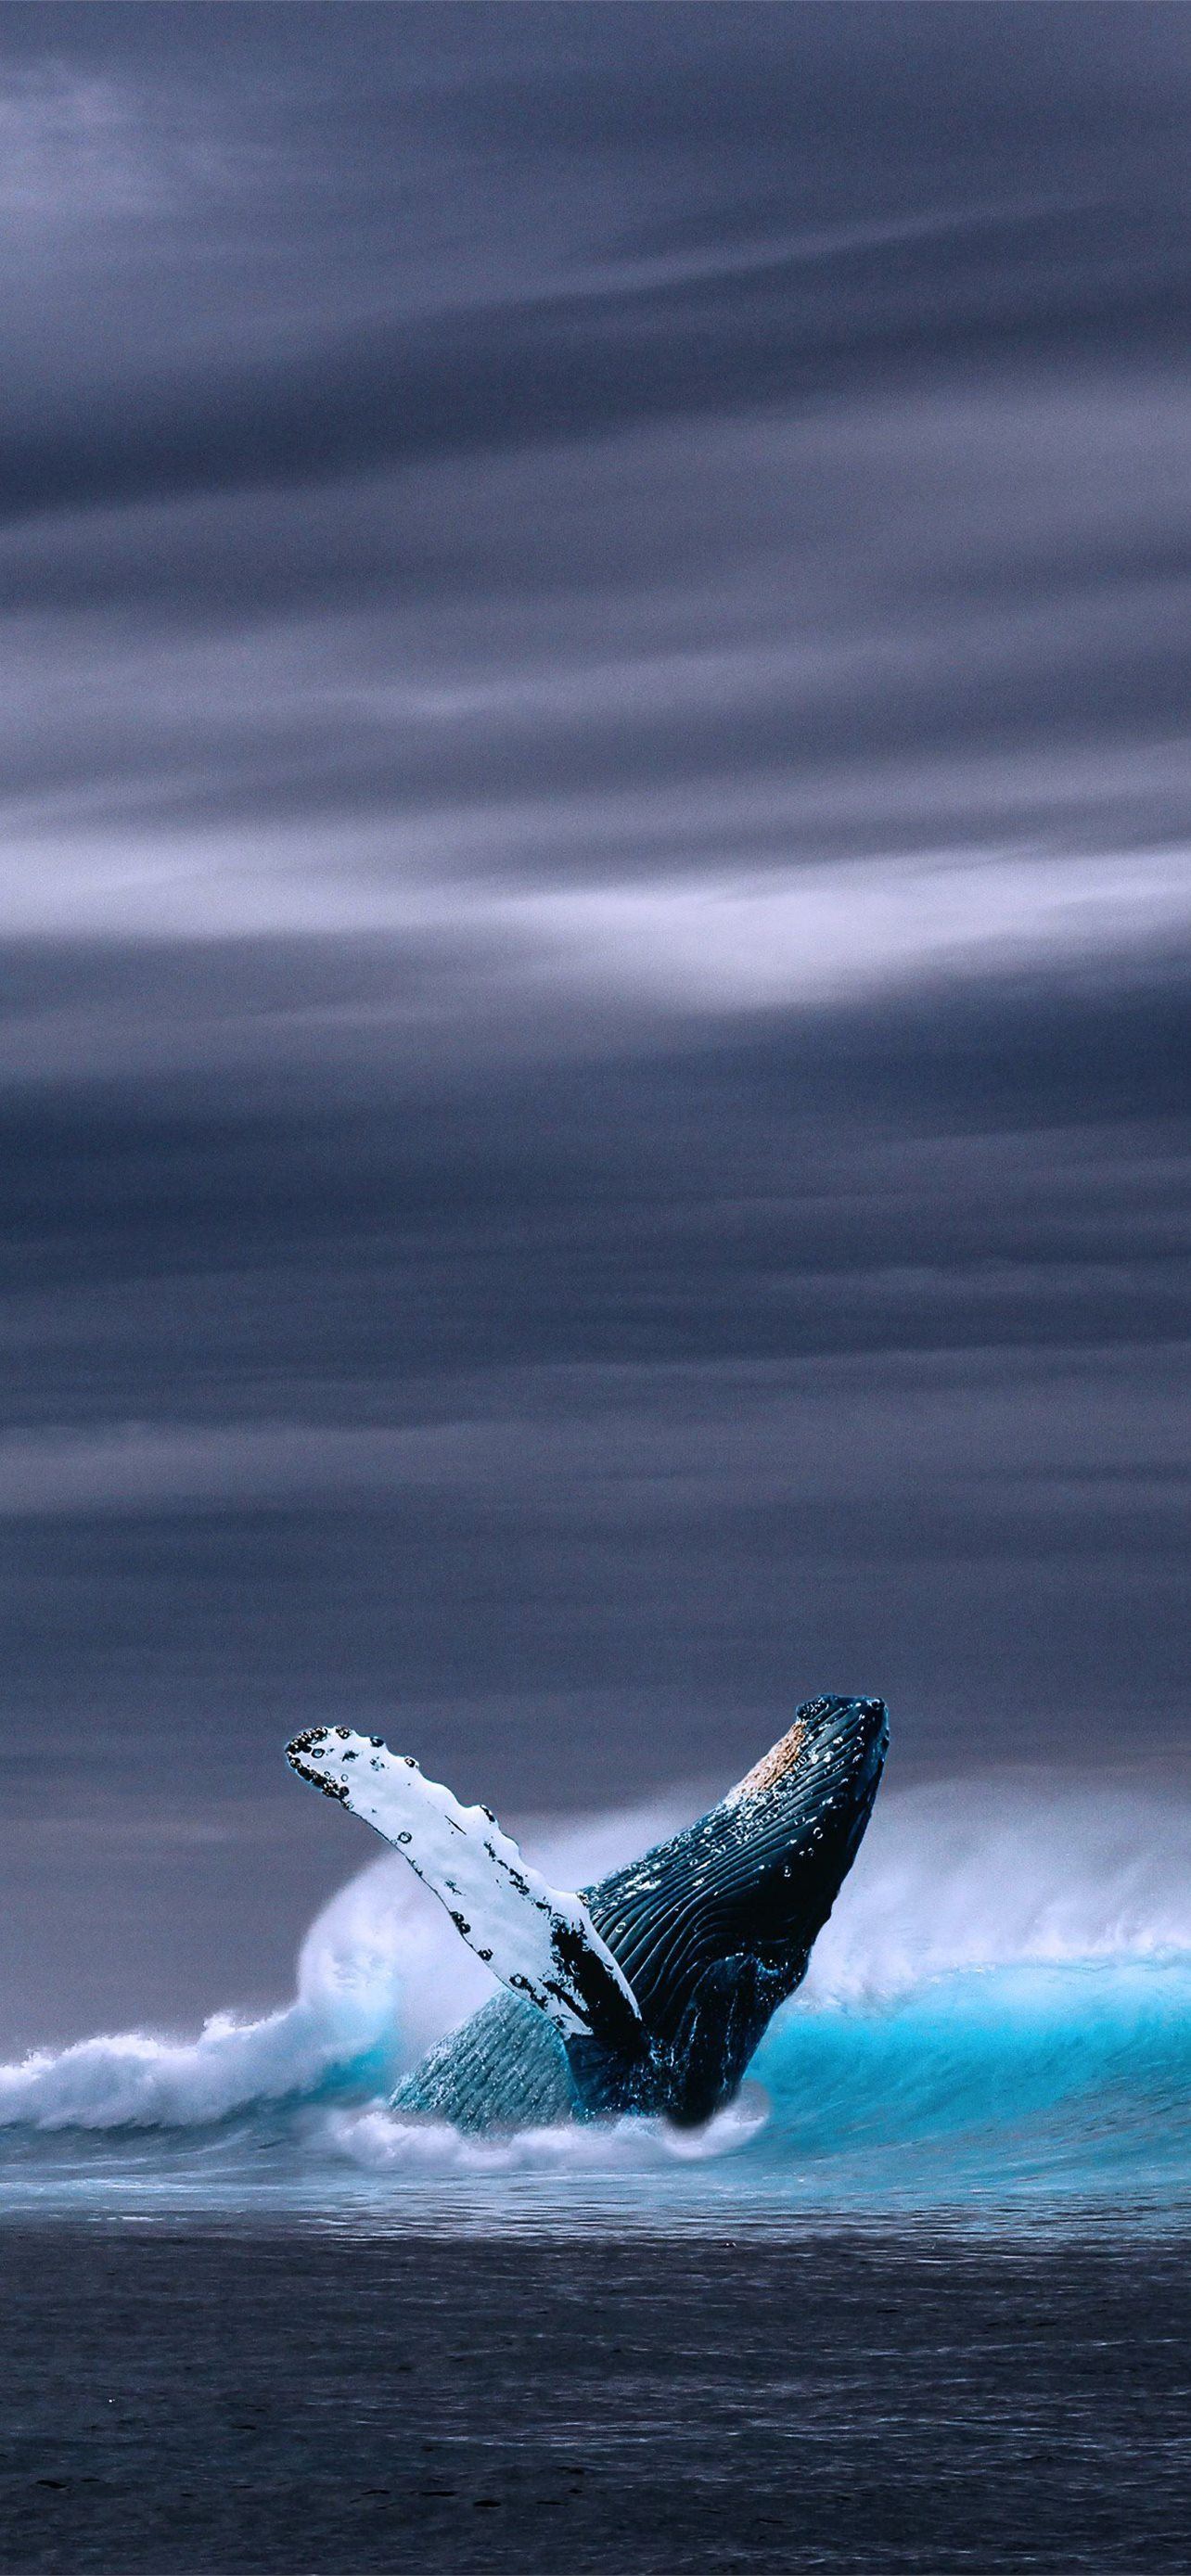 Whale Iphone Wallpapers